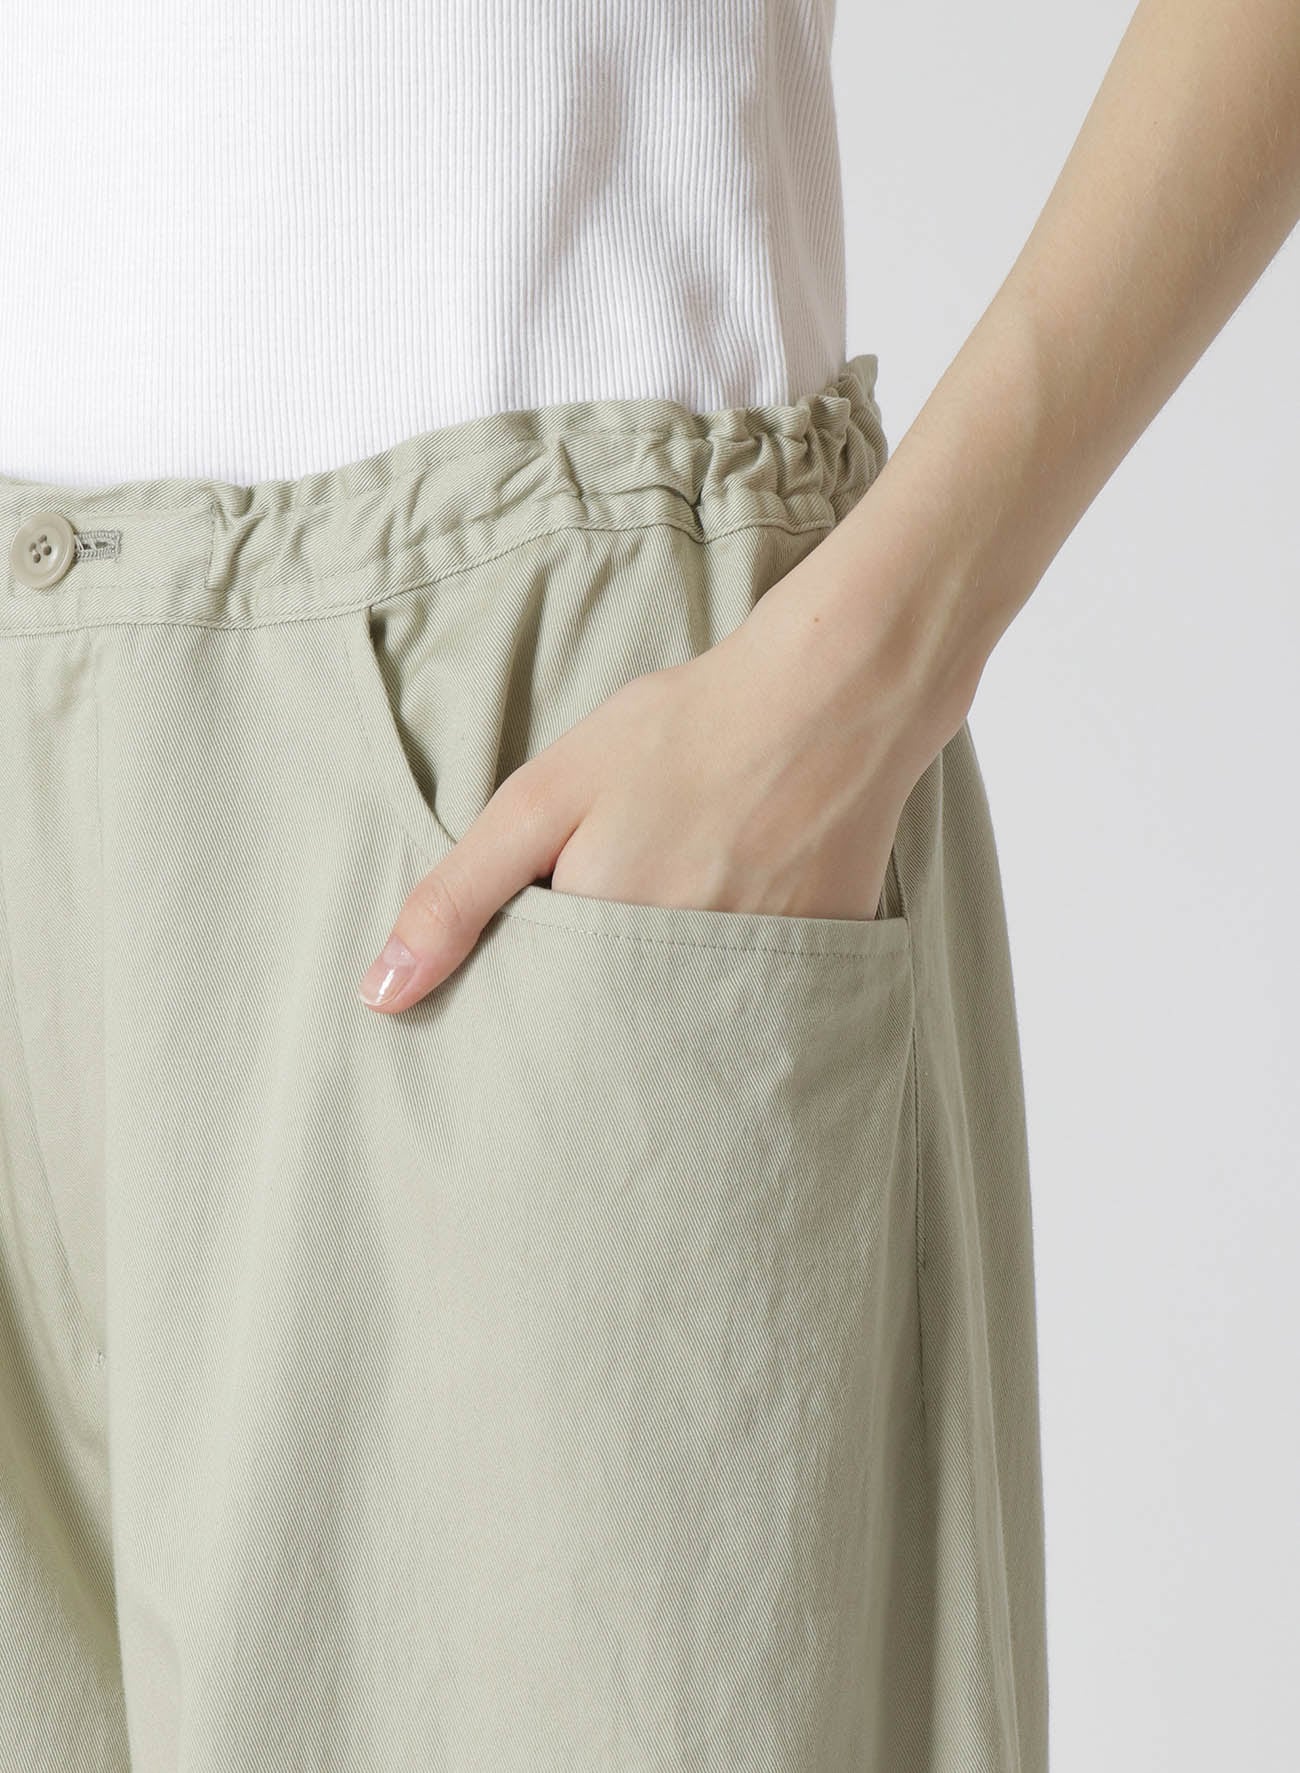 Y's BORN PRODUCT]COTTON TWILL BACK DROP WIDE PANTS(XS Grey): Y's